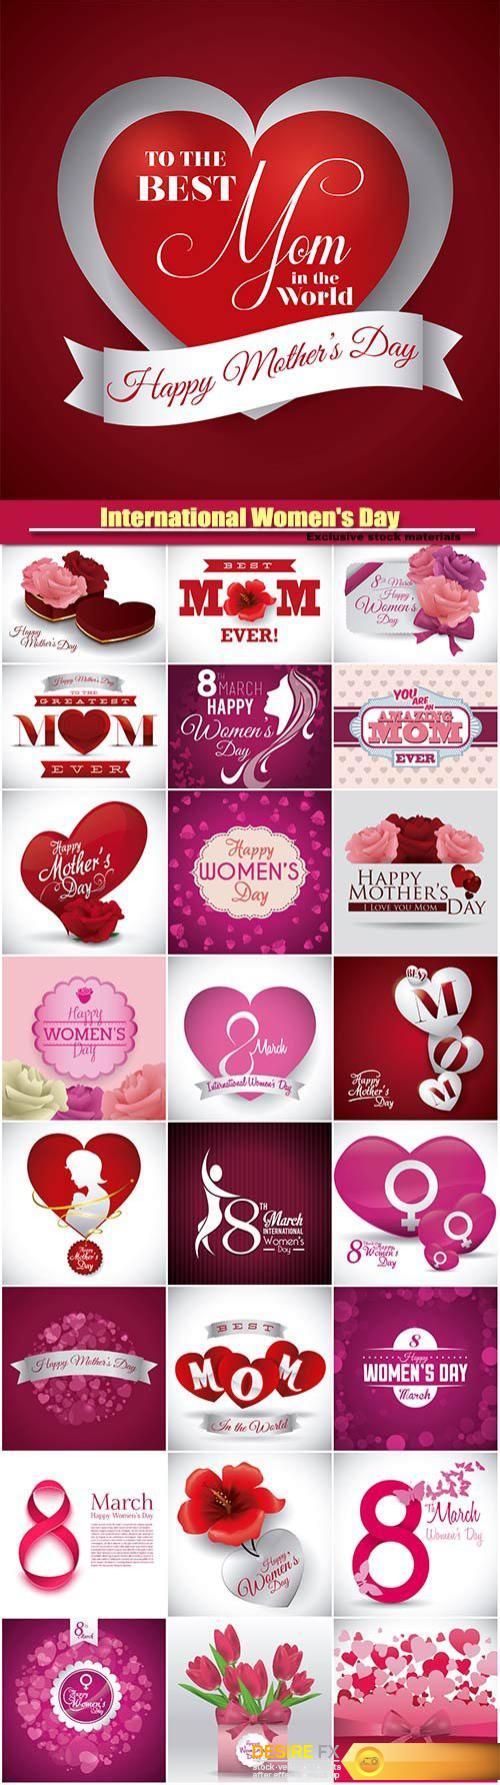 International Women's Day, 8 March backgrounds vector